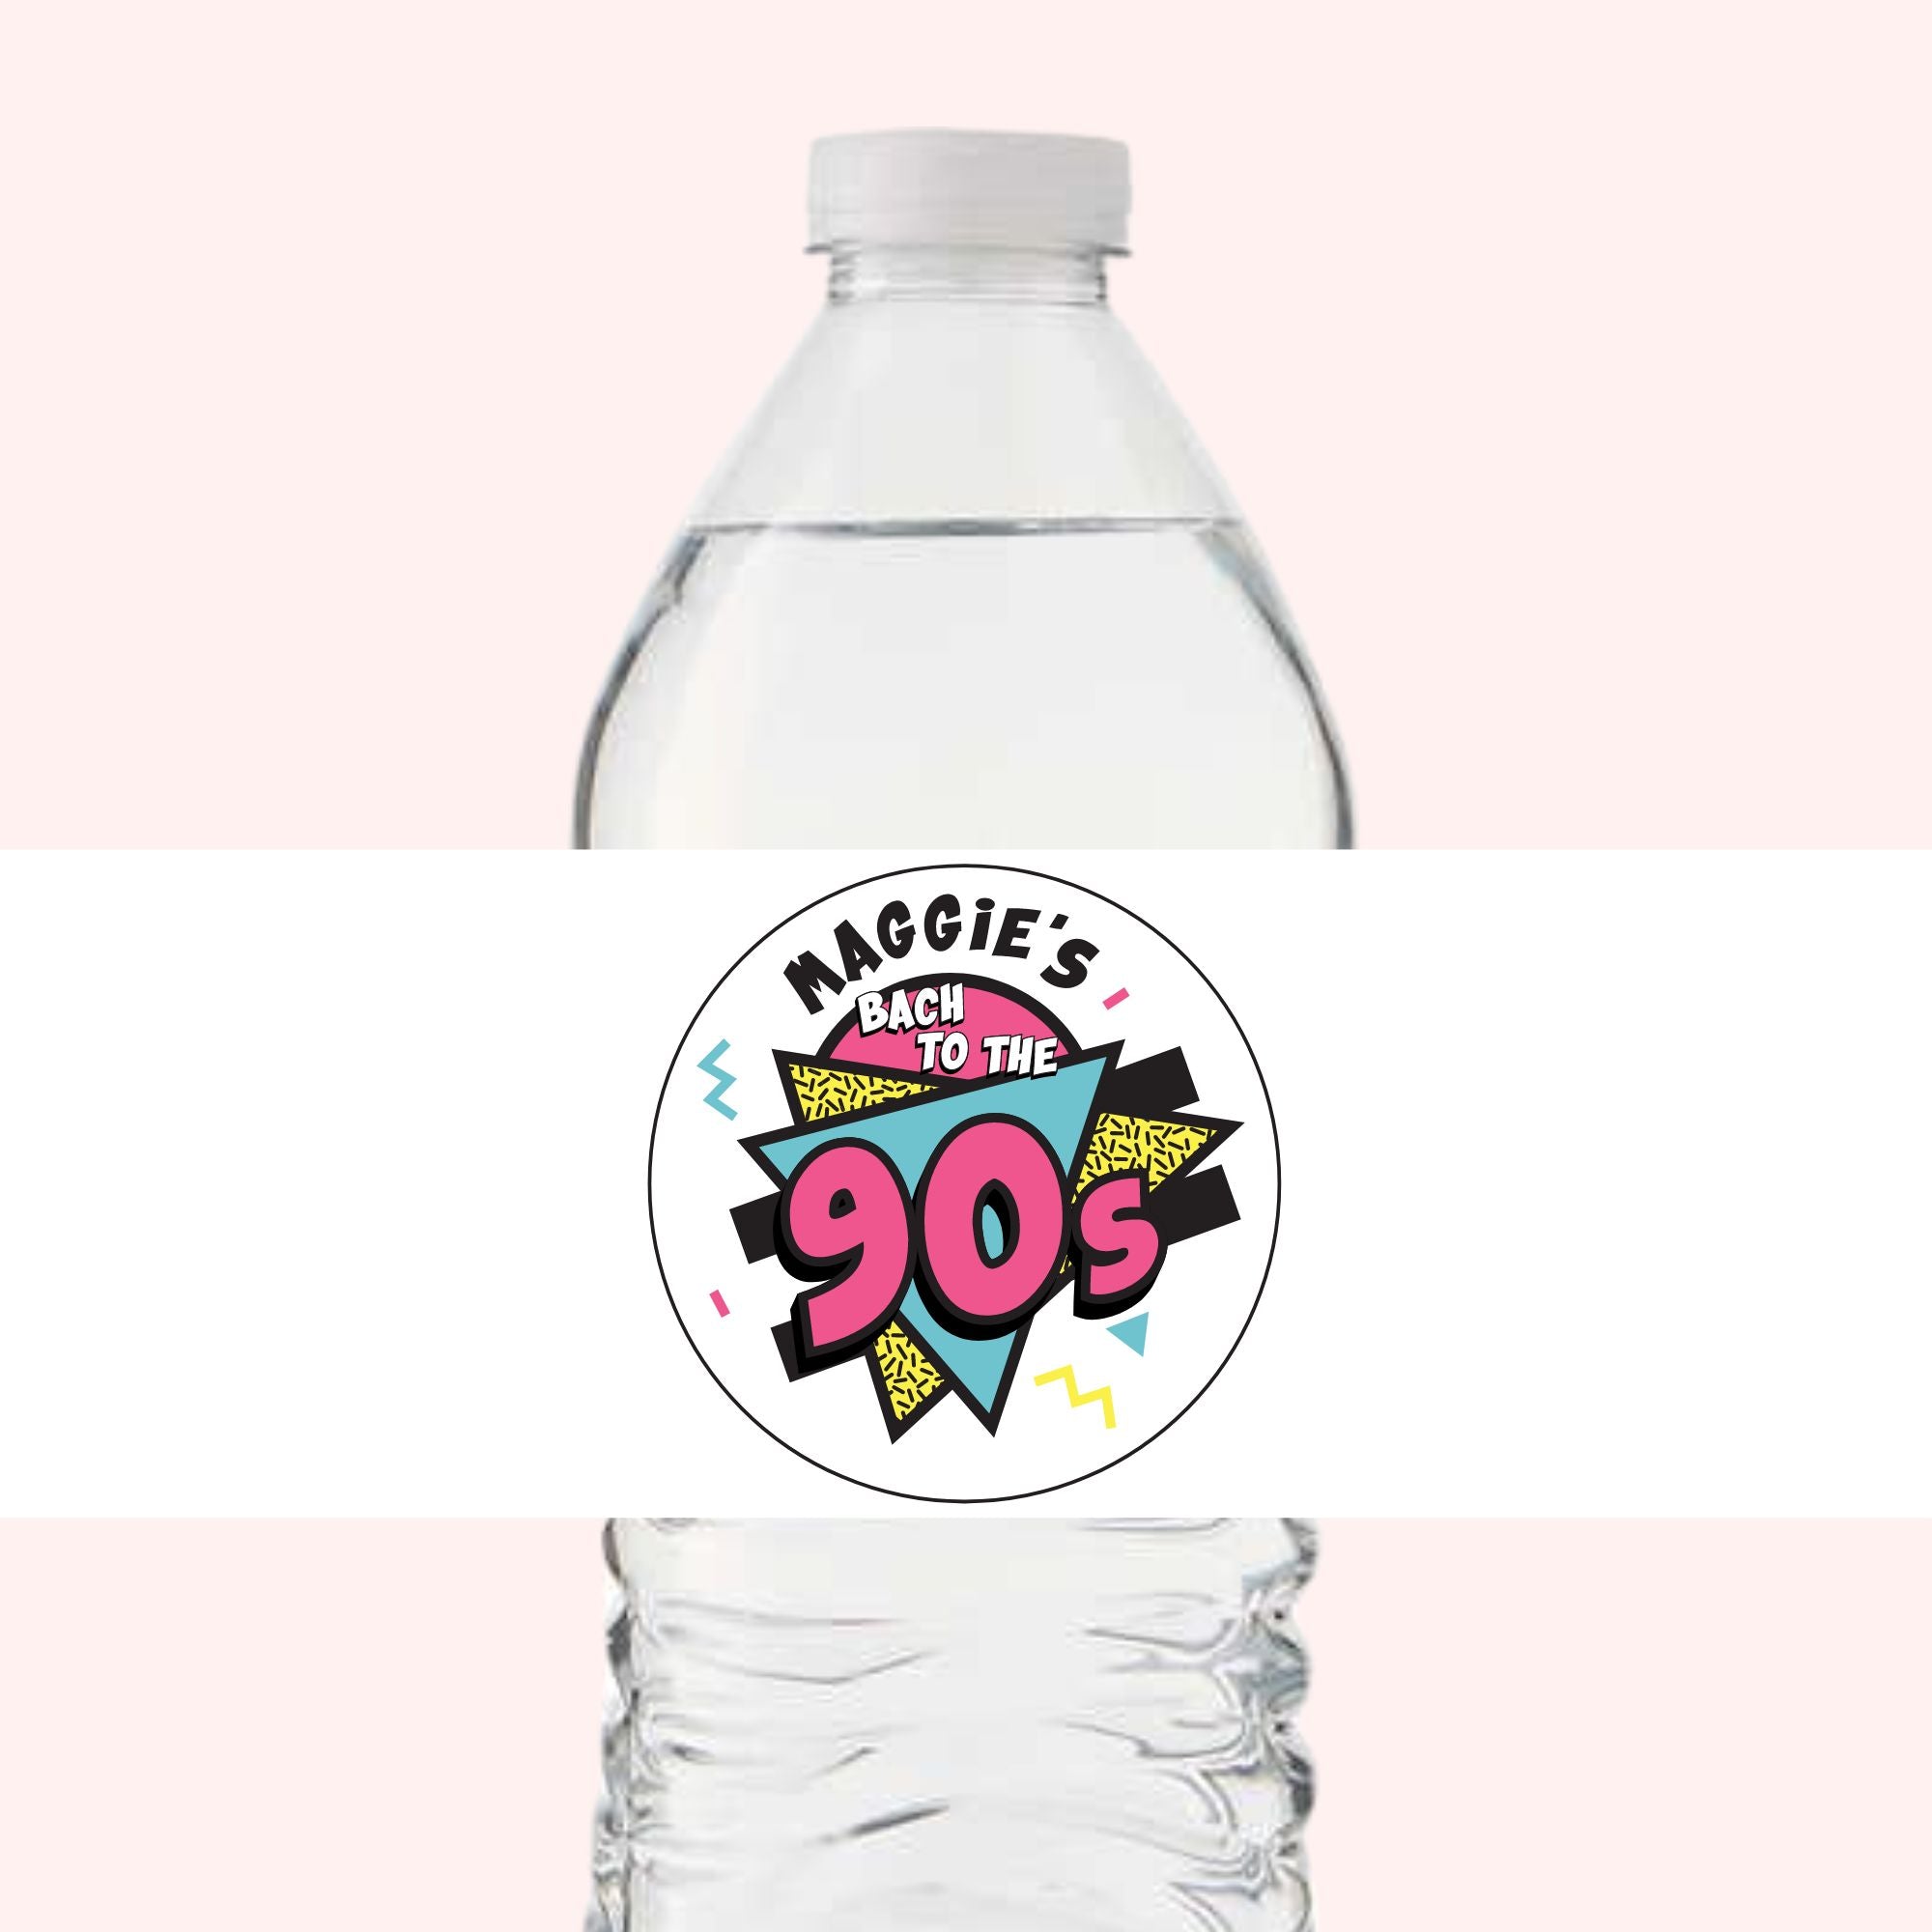 Custom Bach To The 90s Water Bottle Label (Set of 10) - Sprinkled With Pink #bachelorette #custom #gifts